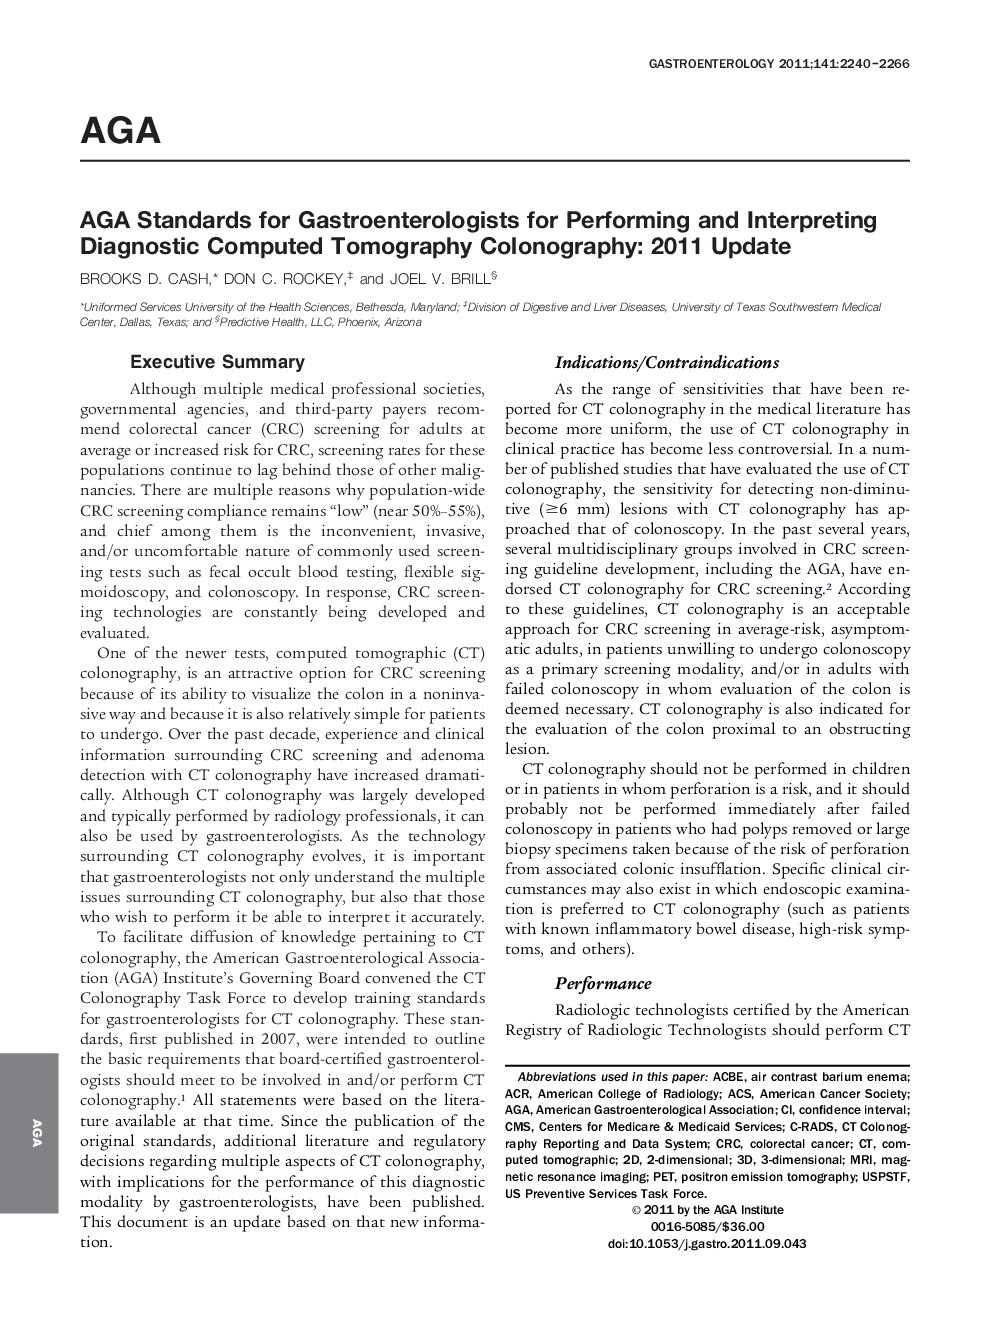 AGA Standards for Gastroenterologists for Performing and Interpreting Diagnostic Computed Tomography Colonography: 2011 Update